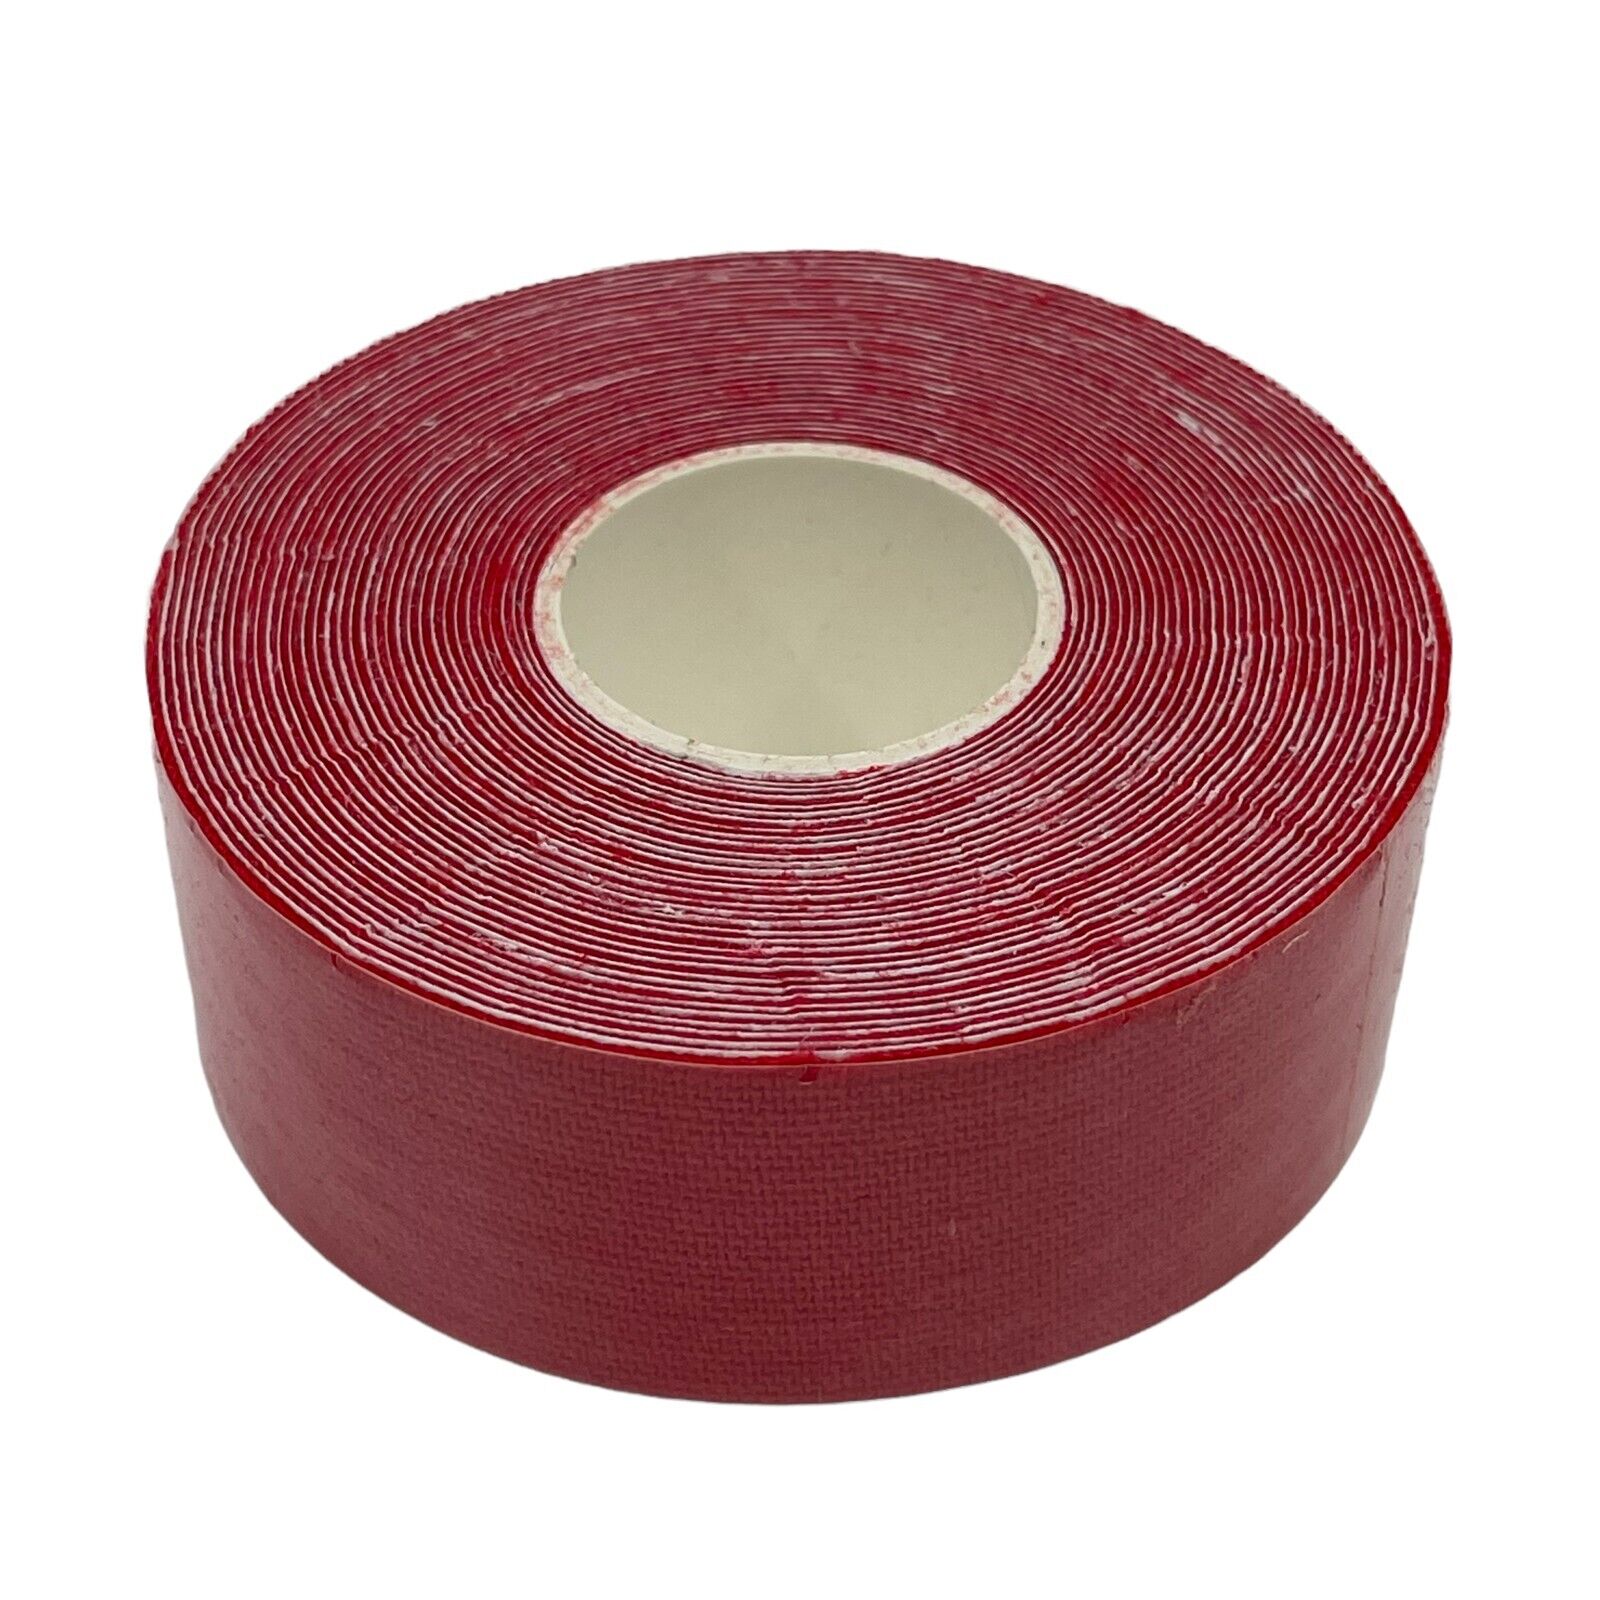 Wholesale Lot x 6 Rolls of Bowling Thumb Finger Hada Patch Protection Tape Unbranded Does Not Apply - фотография #5